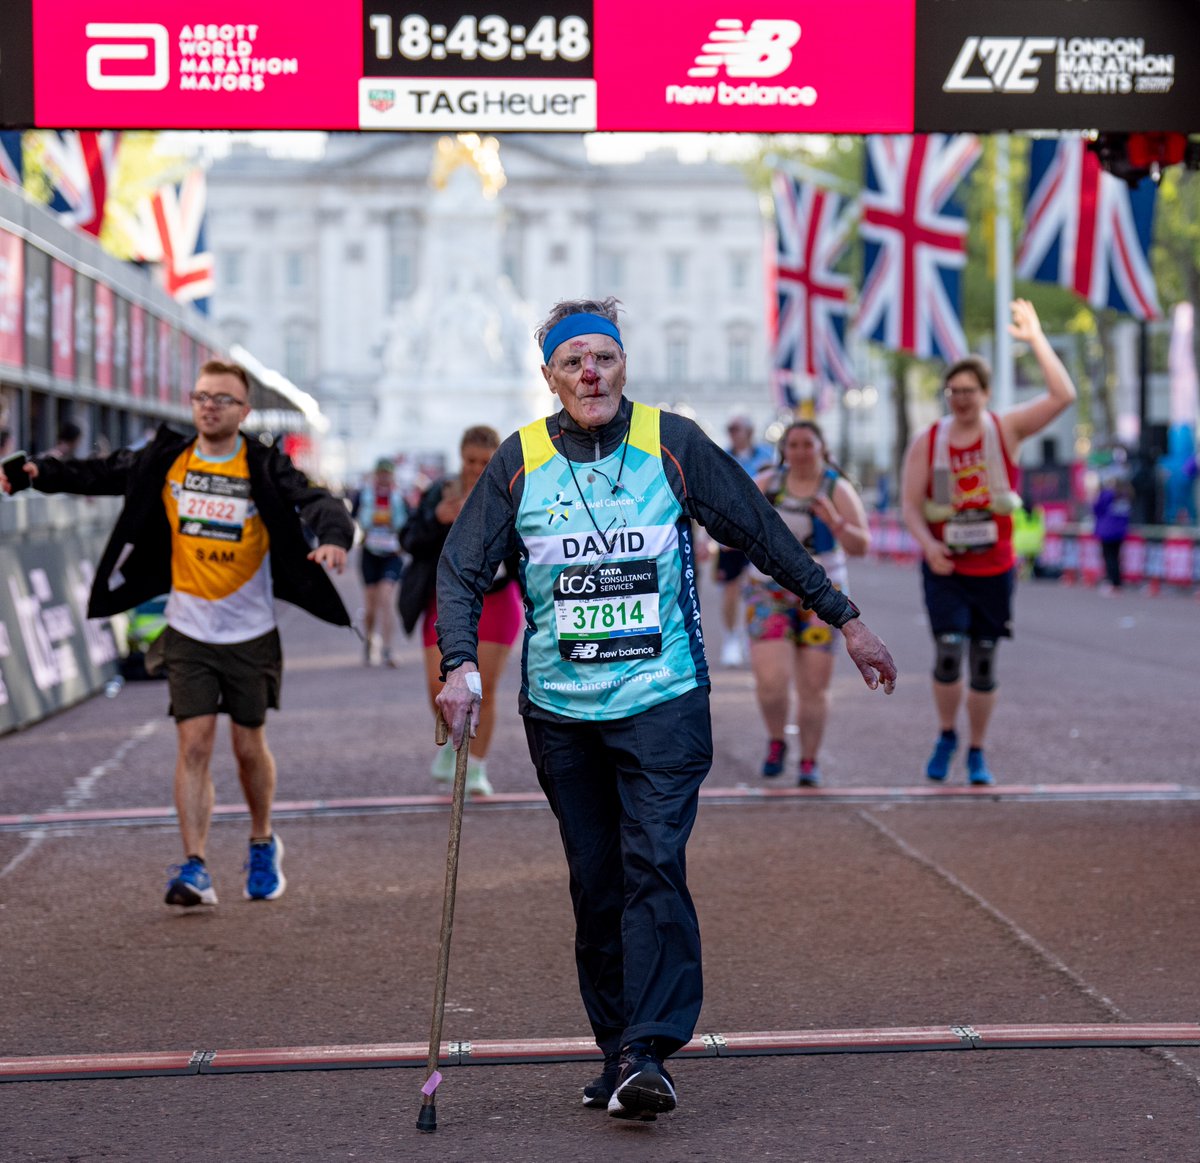 An amazing story at the London Marathon 🙏 David Picksley, with the help of a walking stick, completed the 26.2 mile course in an amazing 7:57:15 🇬🇧 The 91-year-old finished on Sunday despite falling on a bump in the road at 15 miles and suffering a bloody nose 🤯 📸…